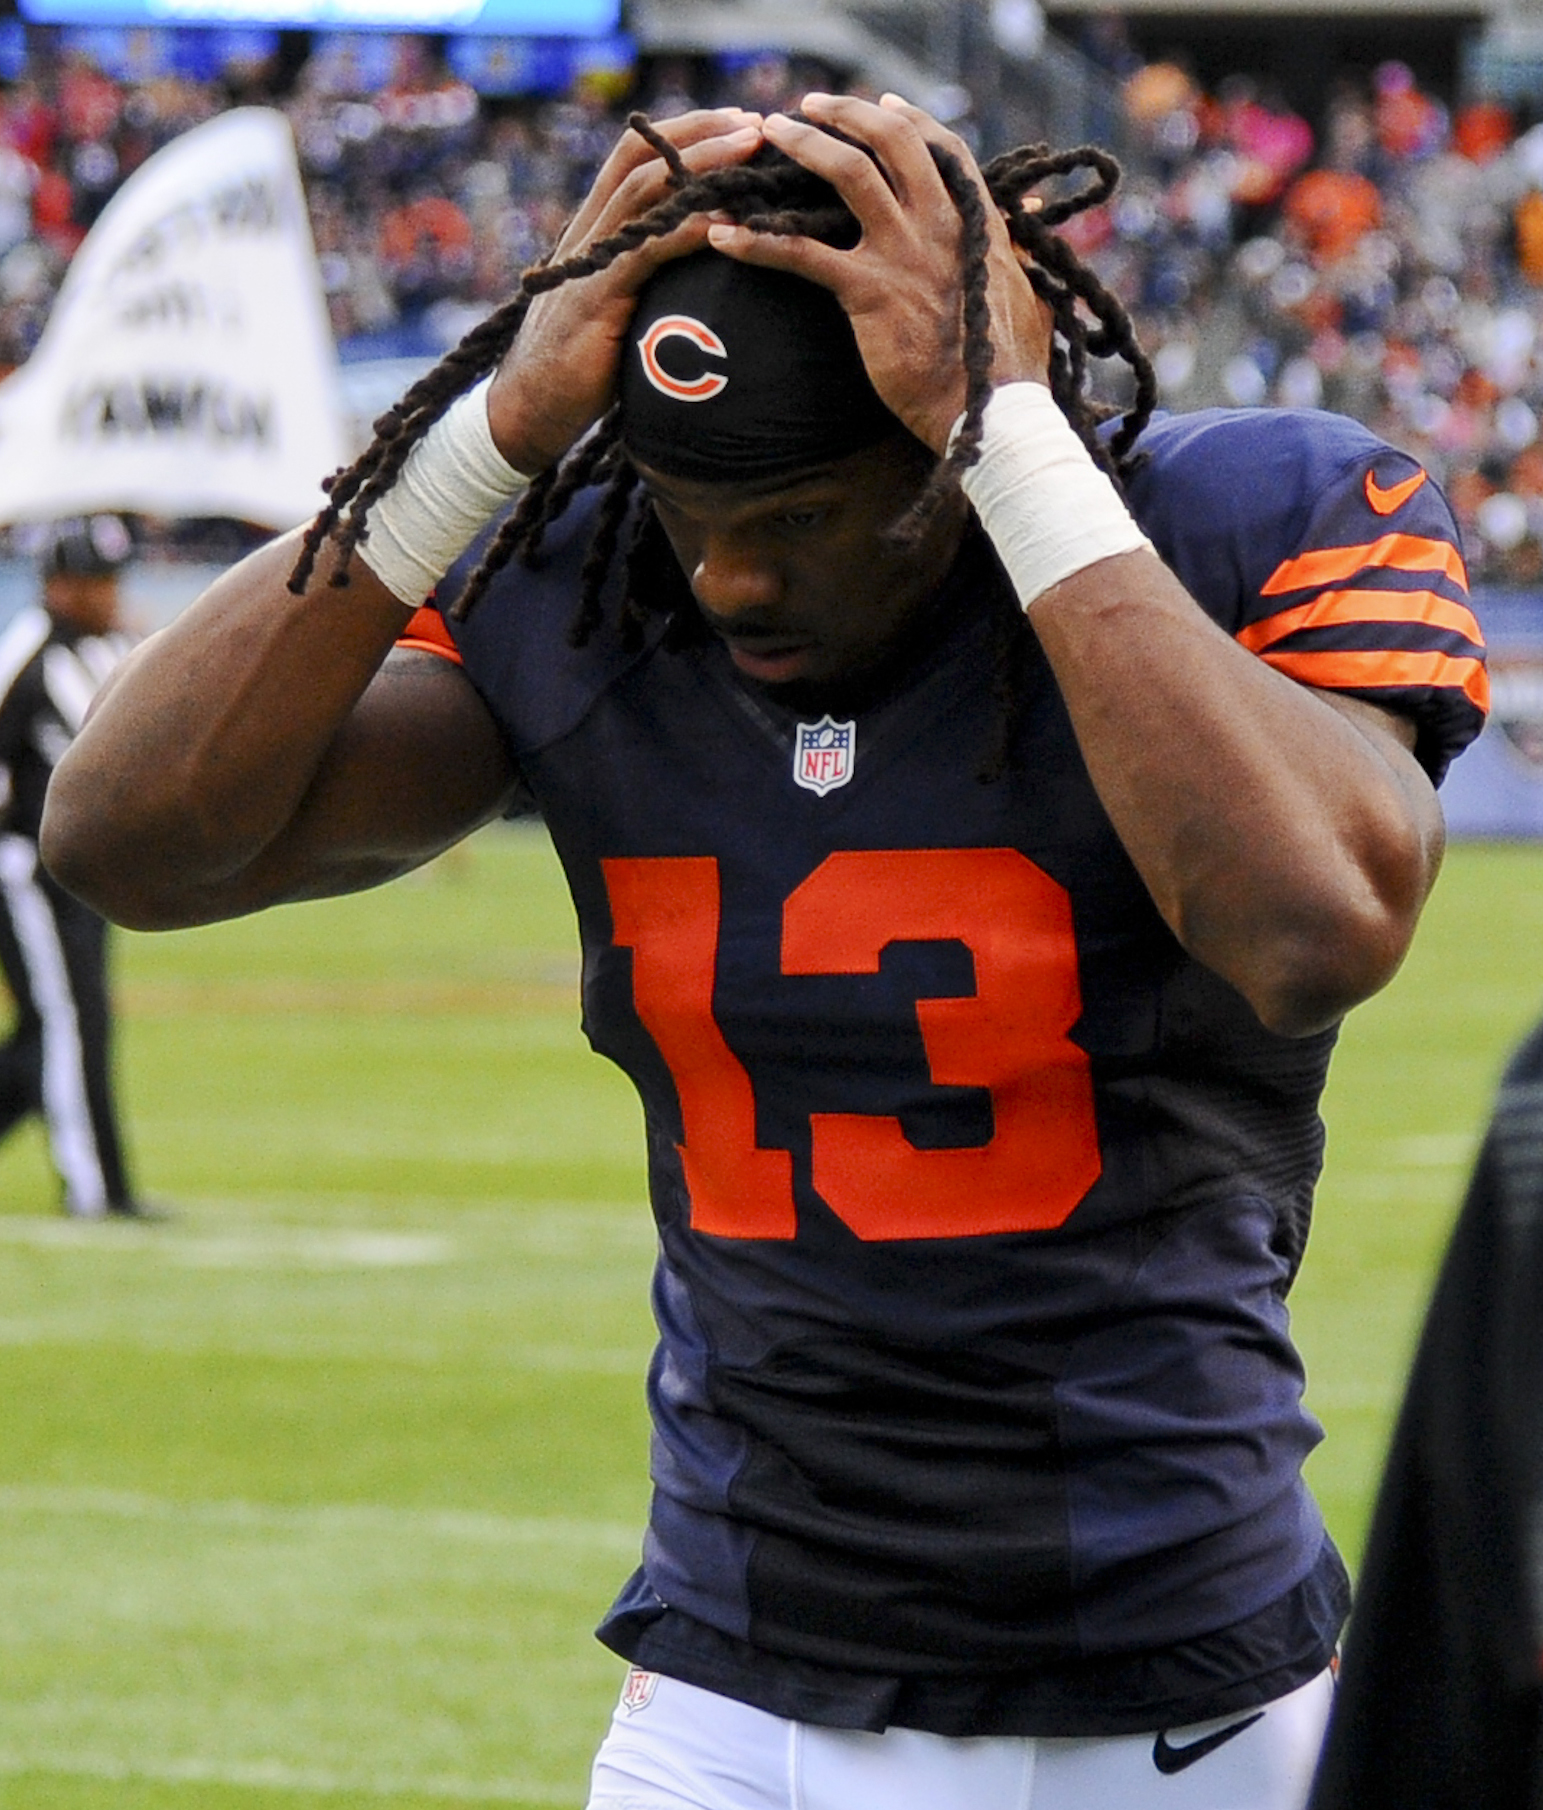 Bears Put Kevin White On IR With Broken Fibula, Officially Cannot Draft 1st Round Picks